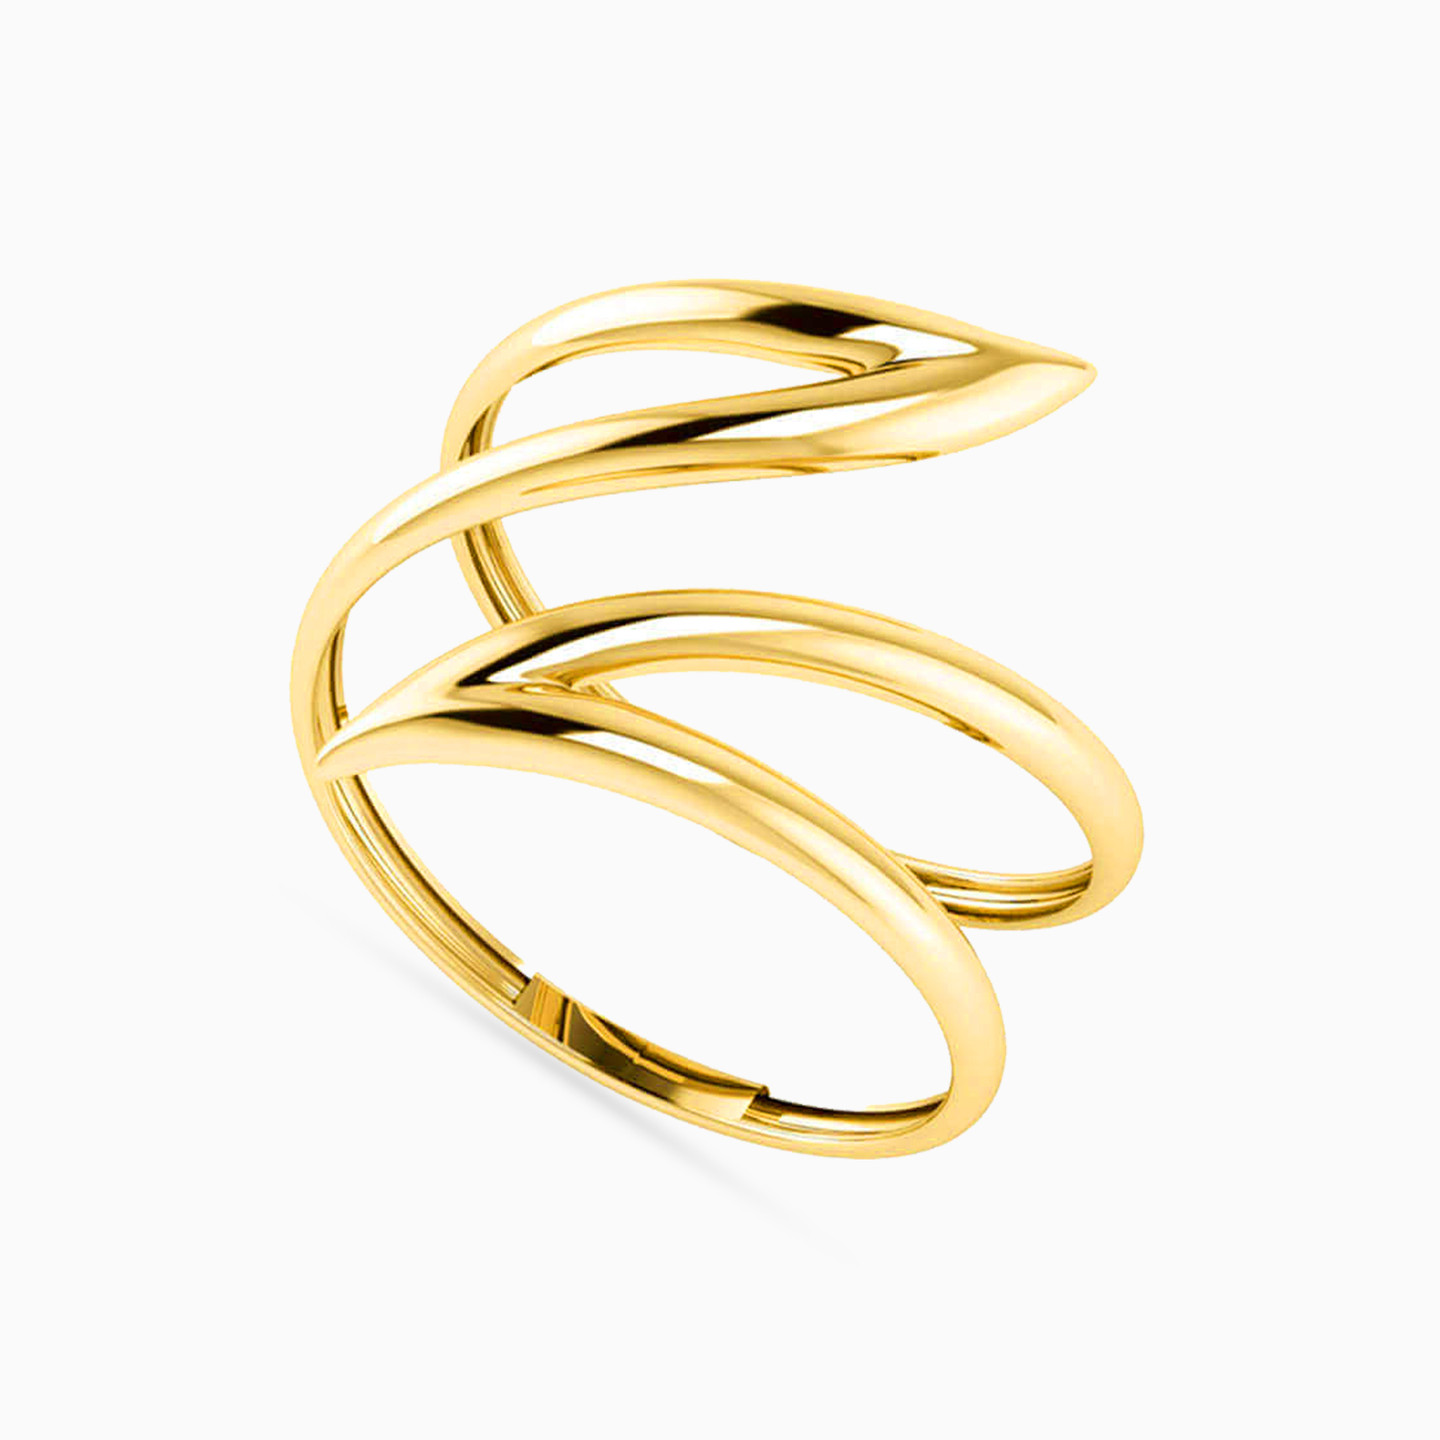 18K Gold Two-headed Ring - 2